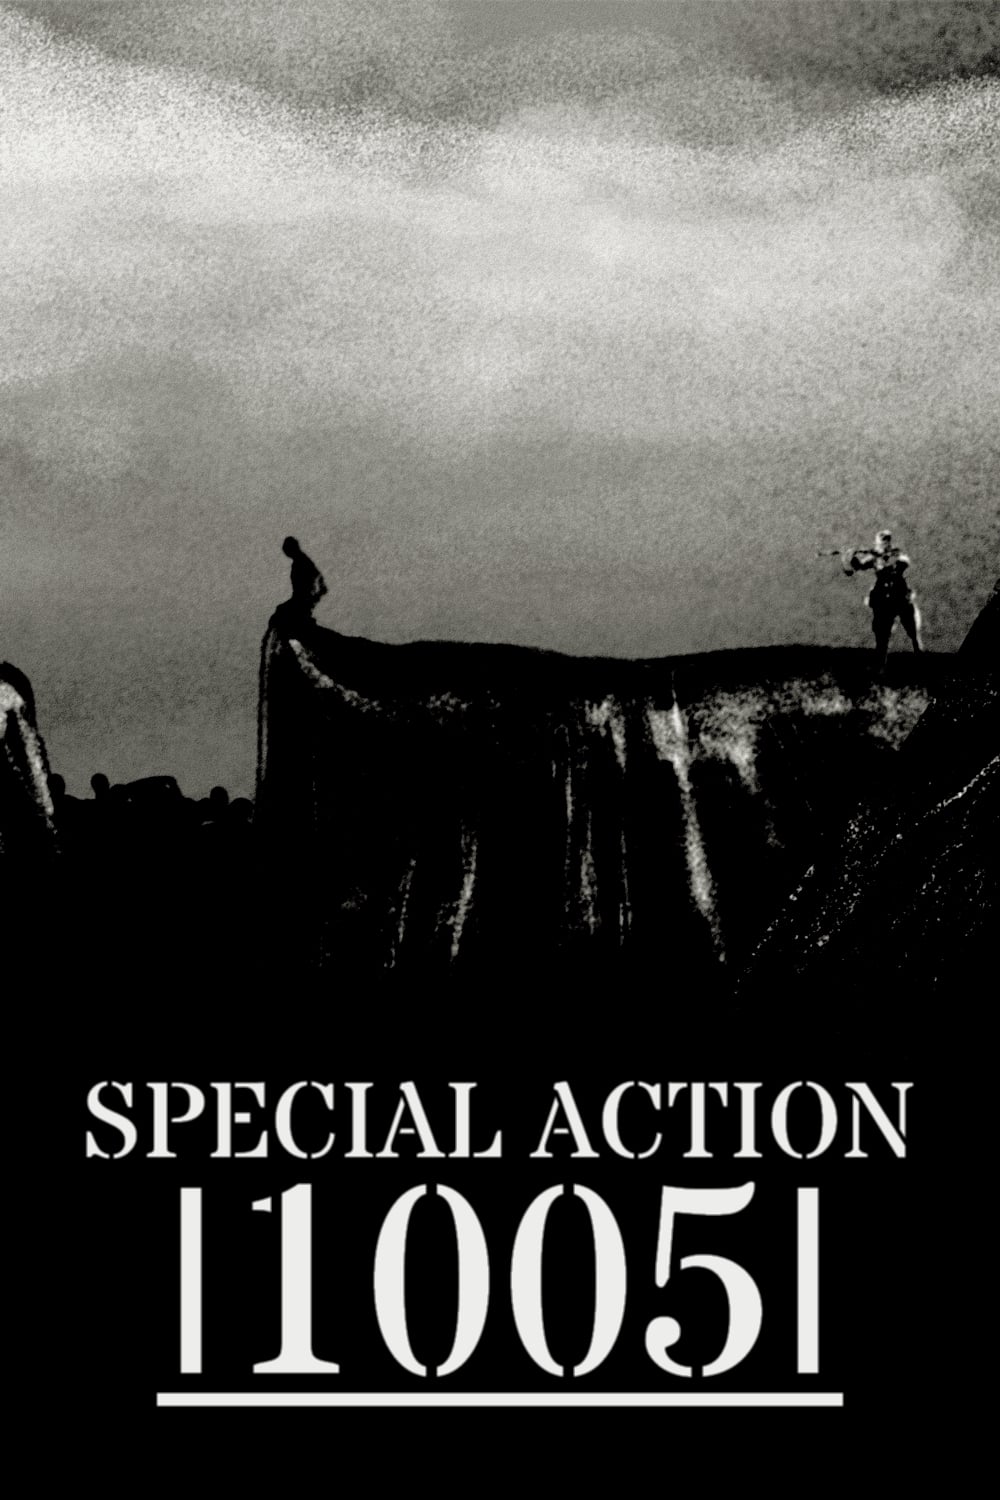 Special Action 1005